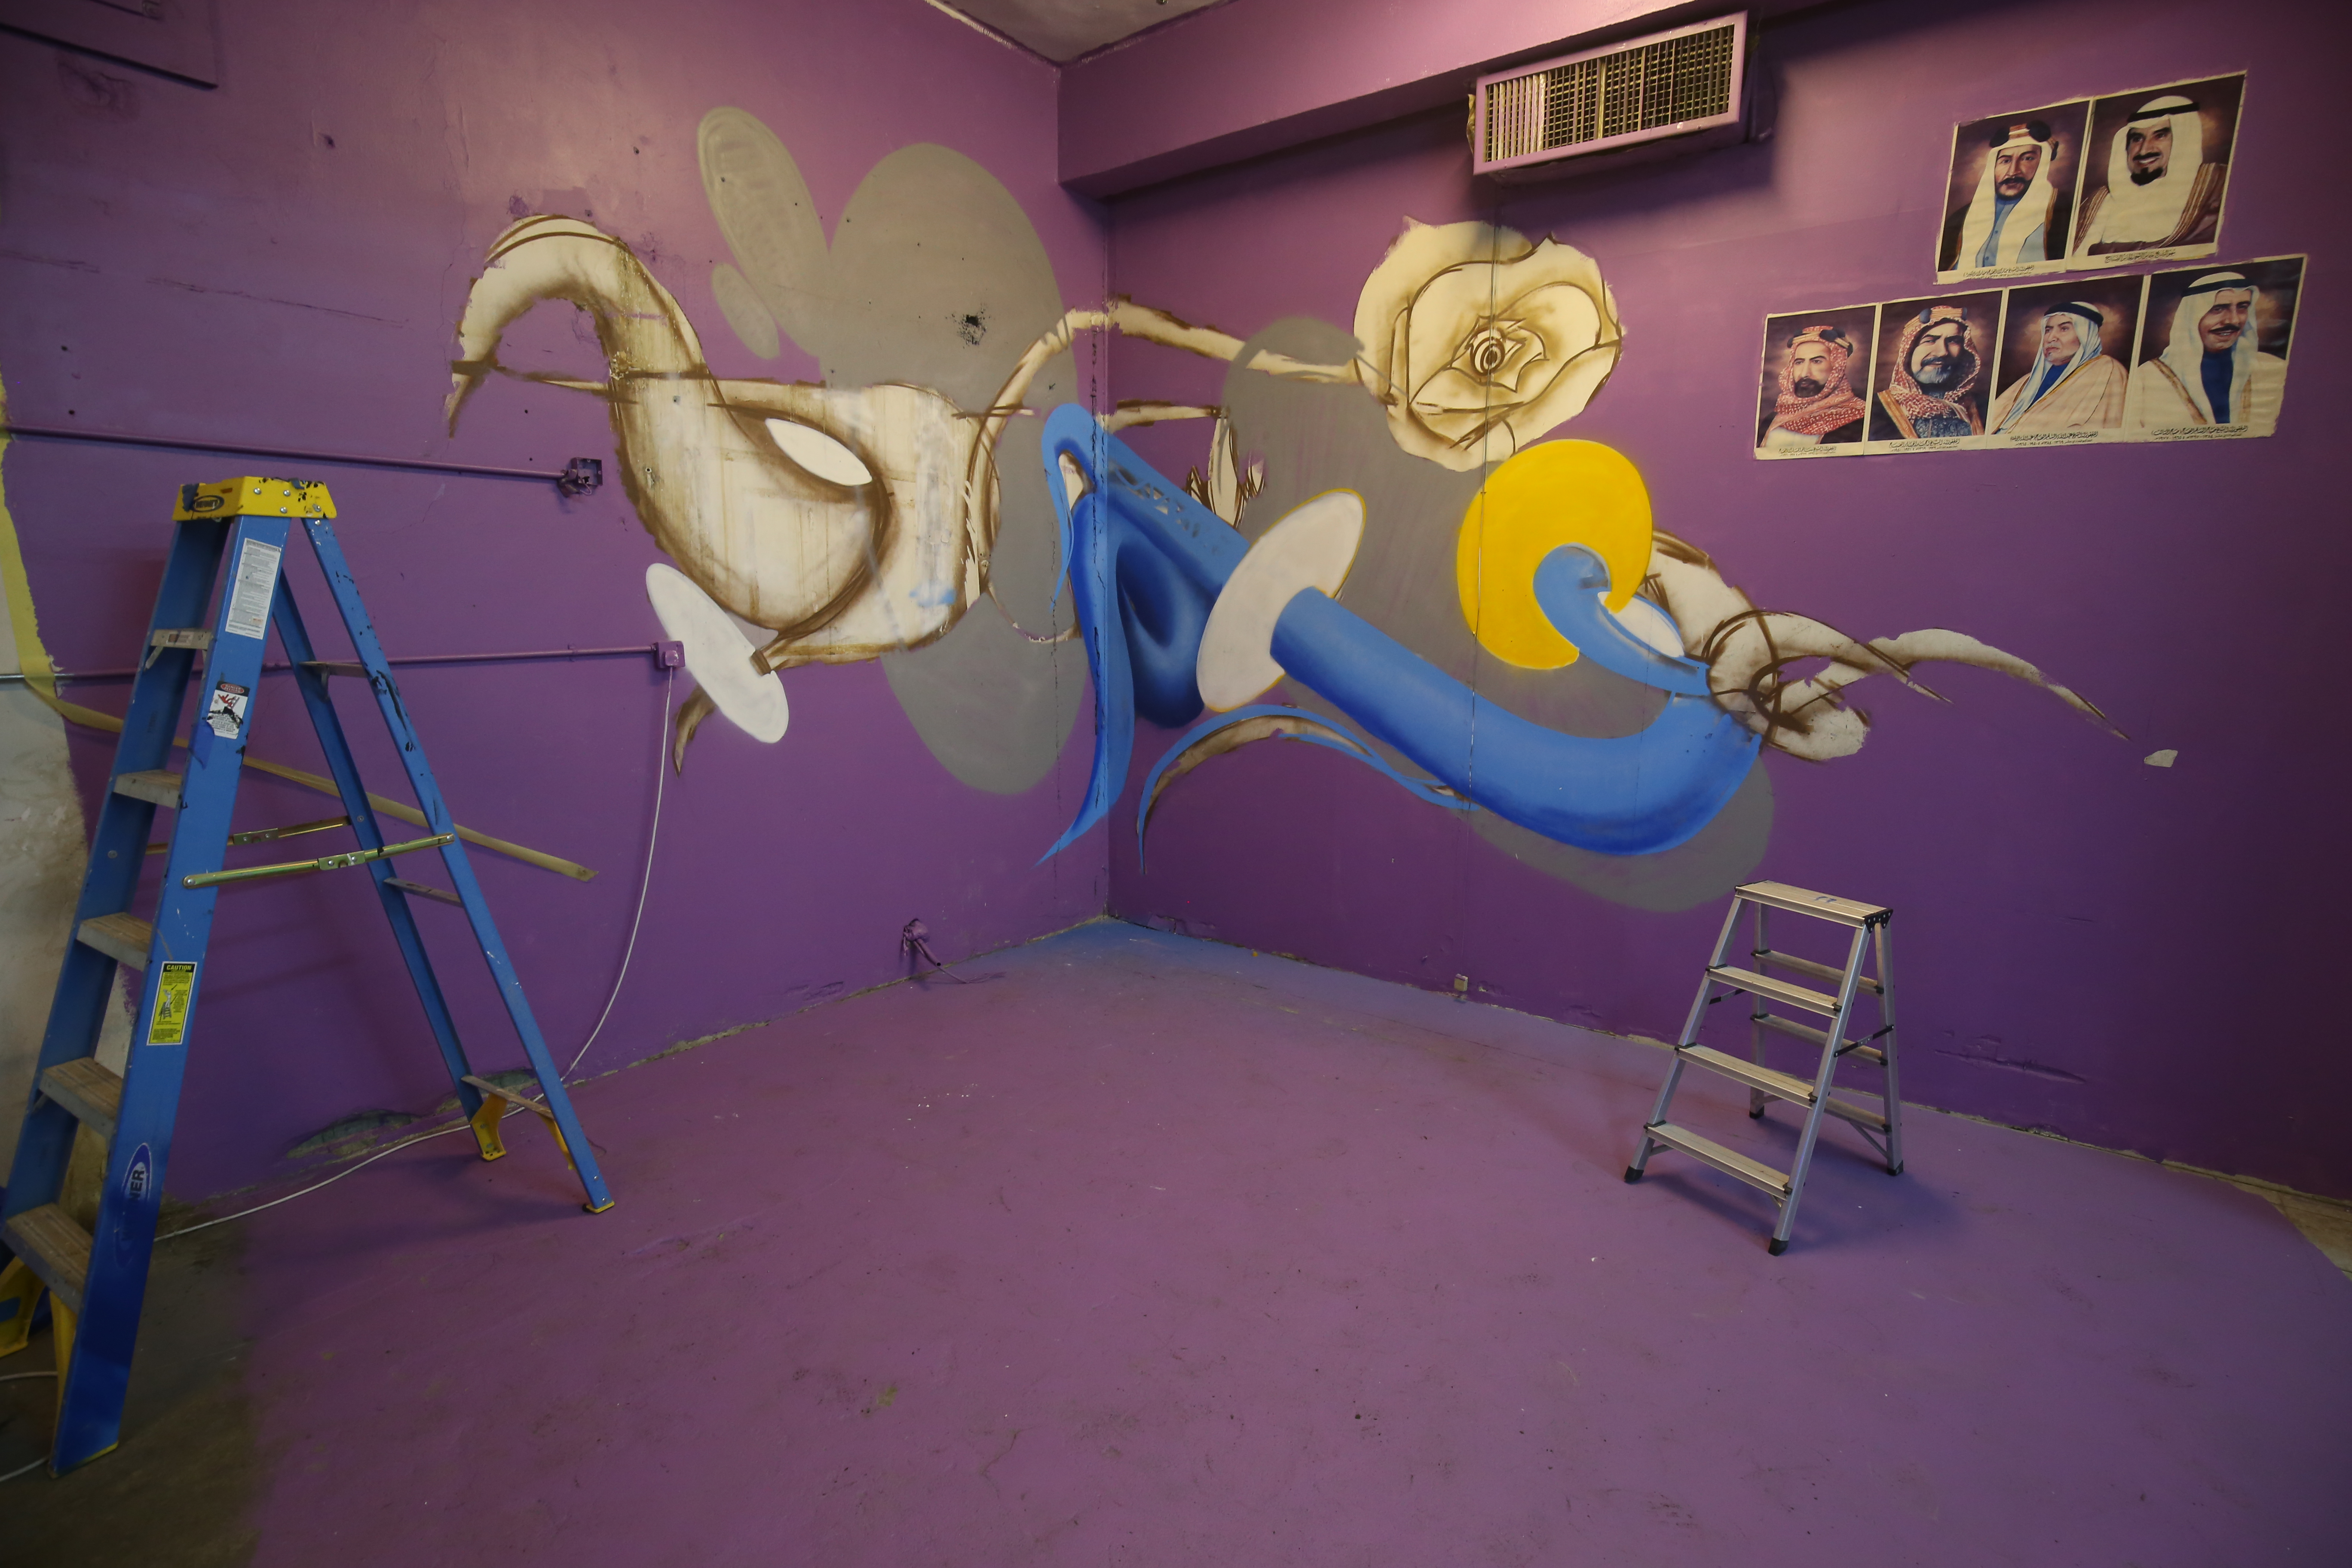 Making magic with murals